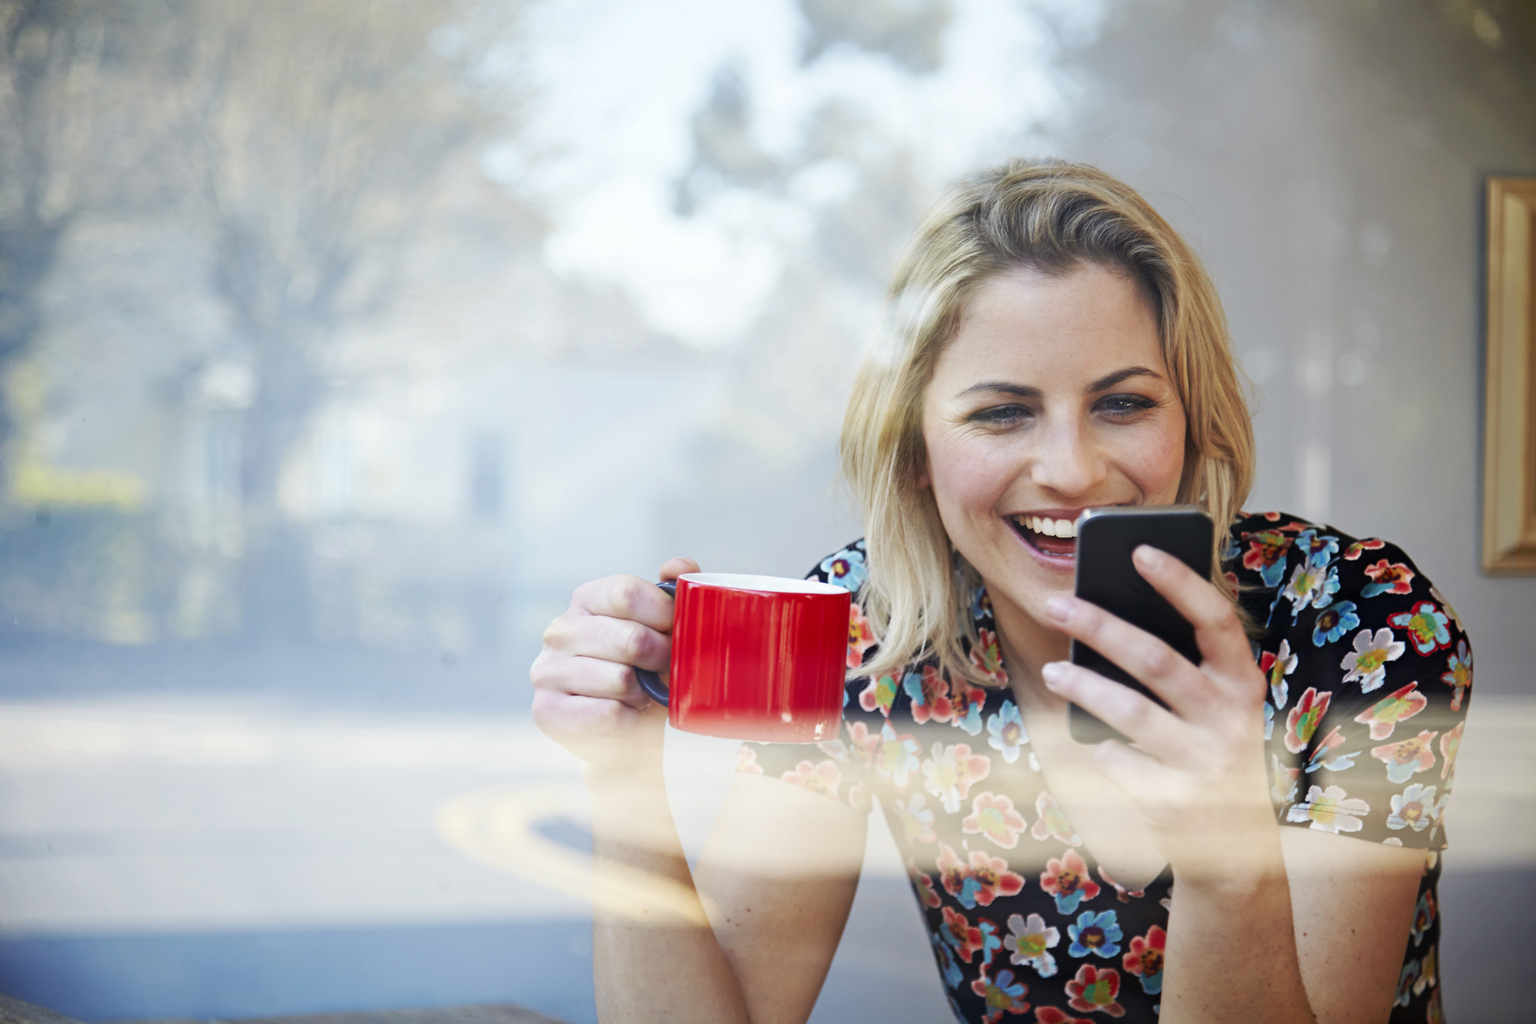 Woman laughing at her phone in coffee shop window.